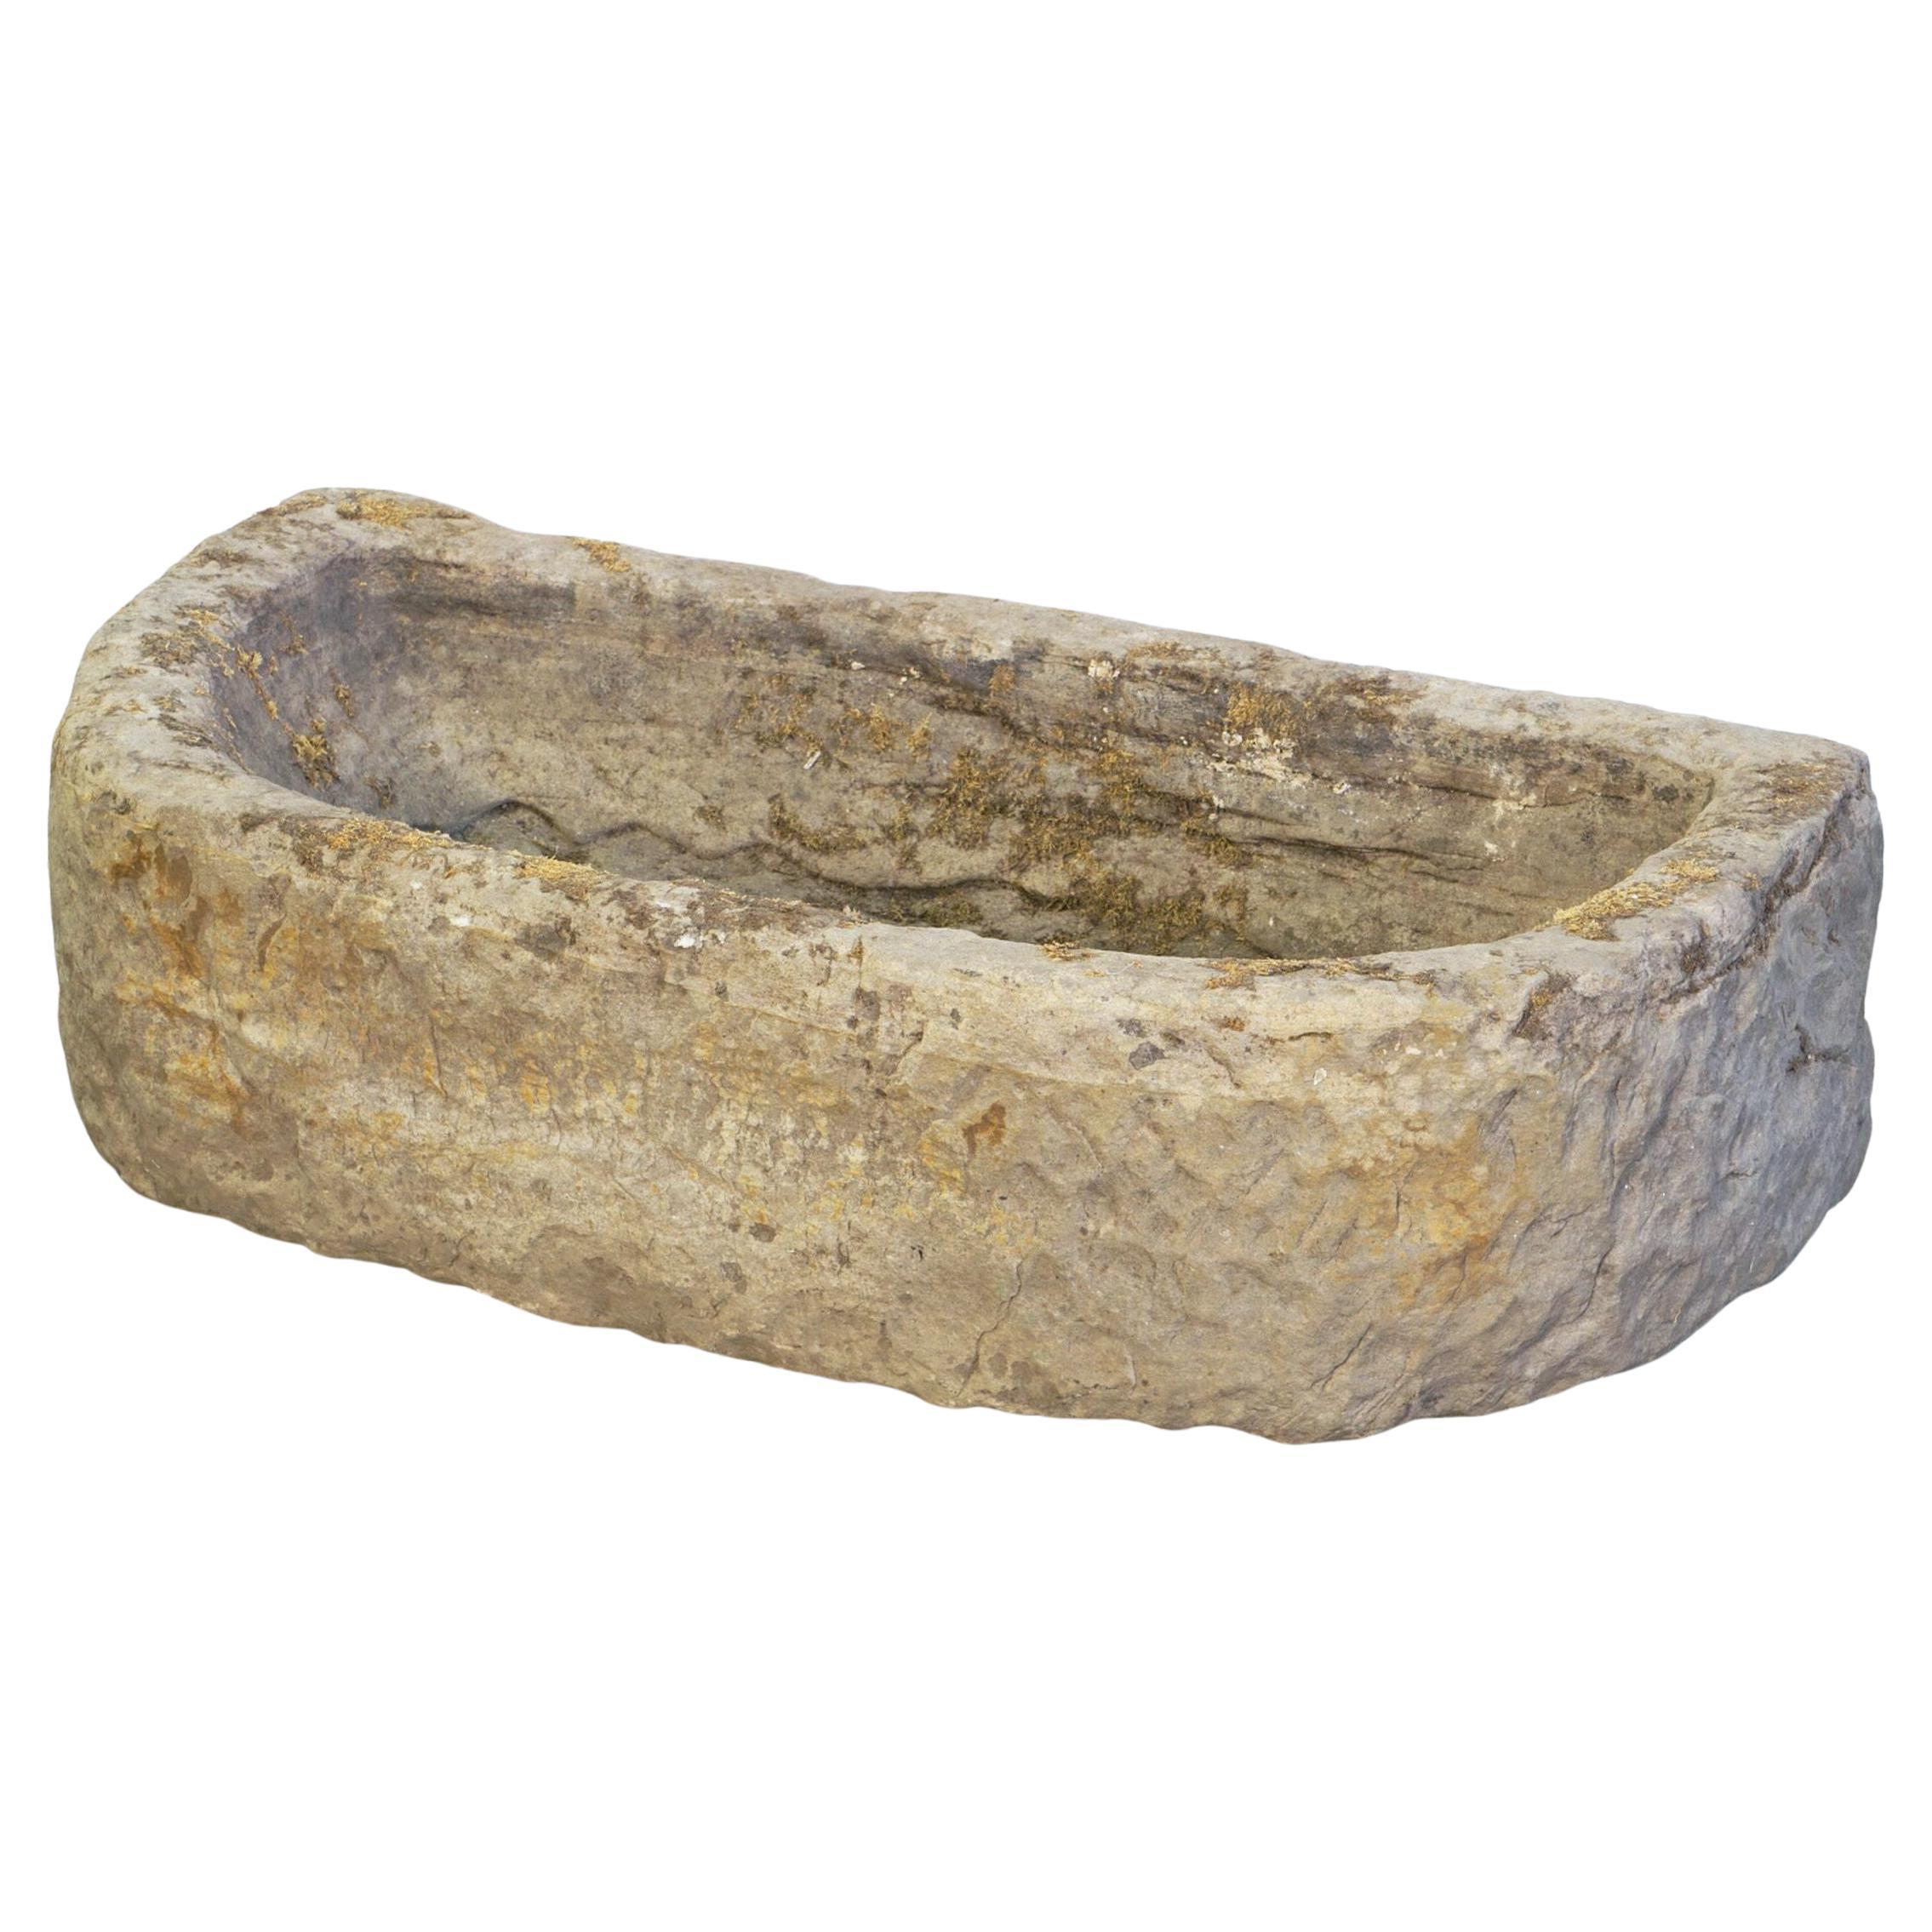 English Garden Trough or Planter of Carved Stone